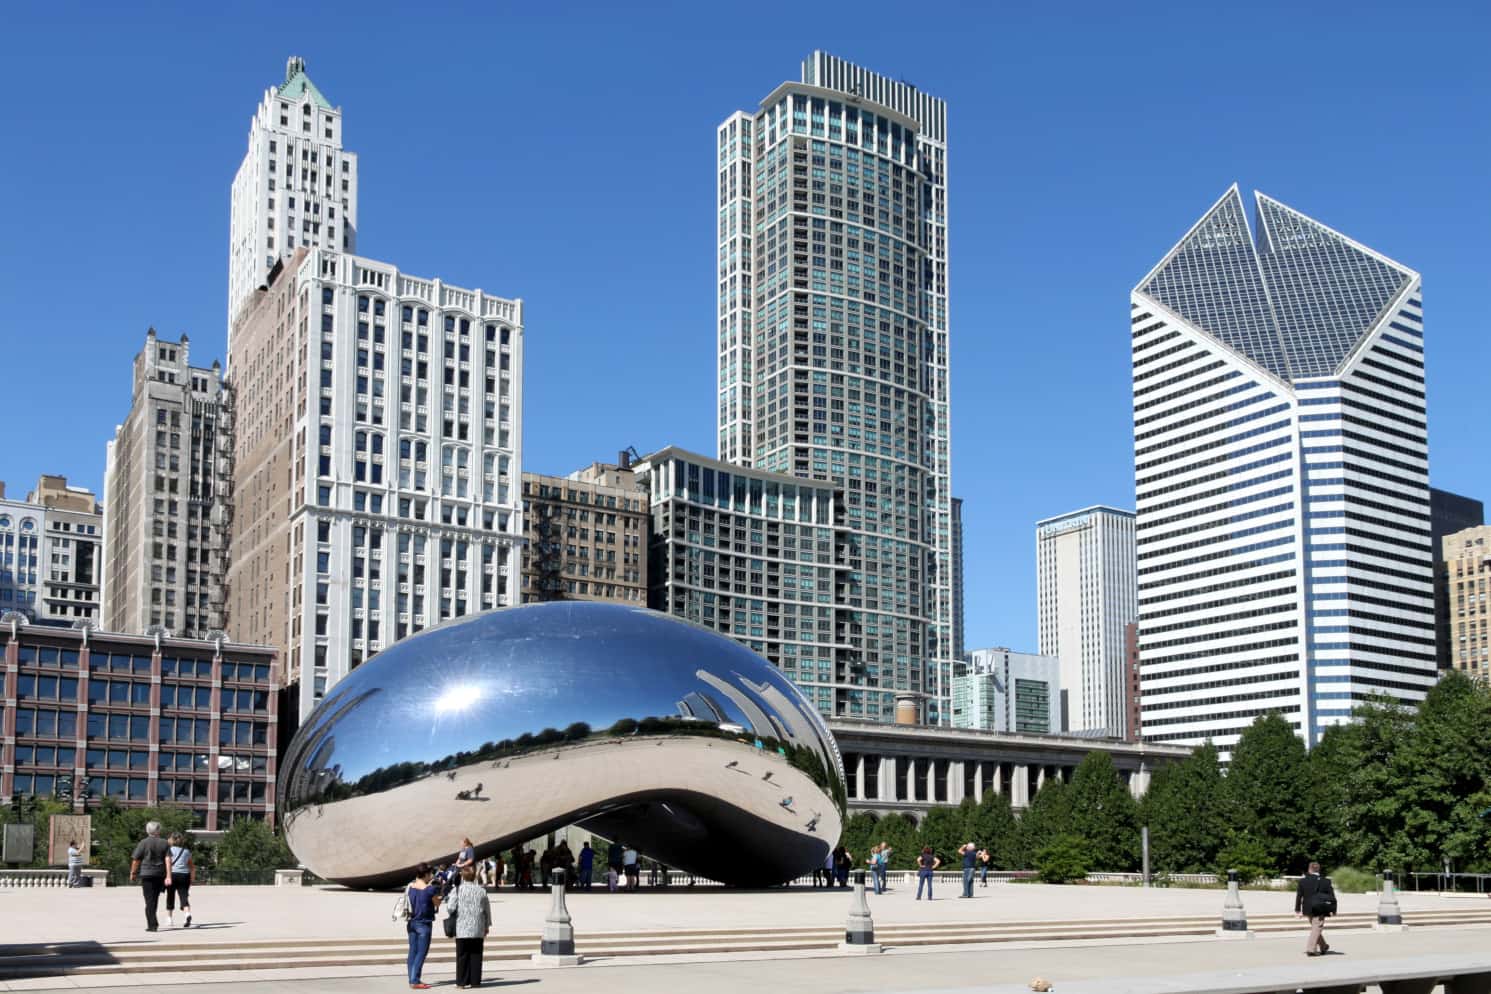 The Cloud Gate sculpture, aka "The Bean", in Millennium Park Chicago with the historic Michigan Avenue "streetwall" in the background